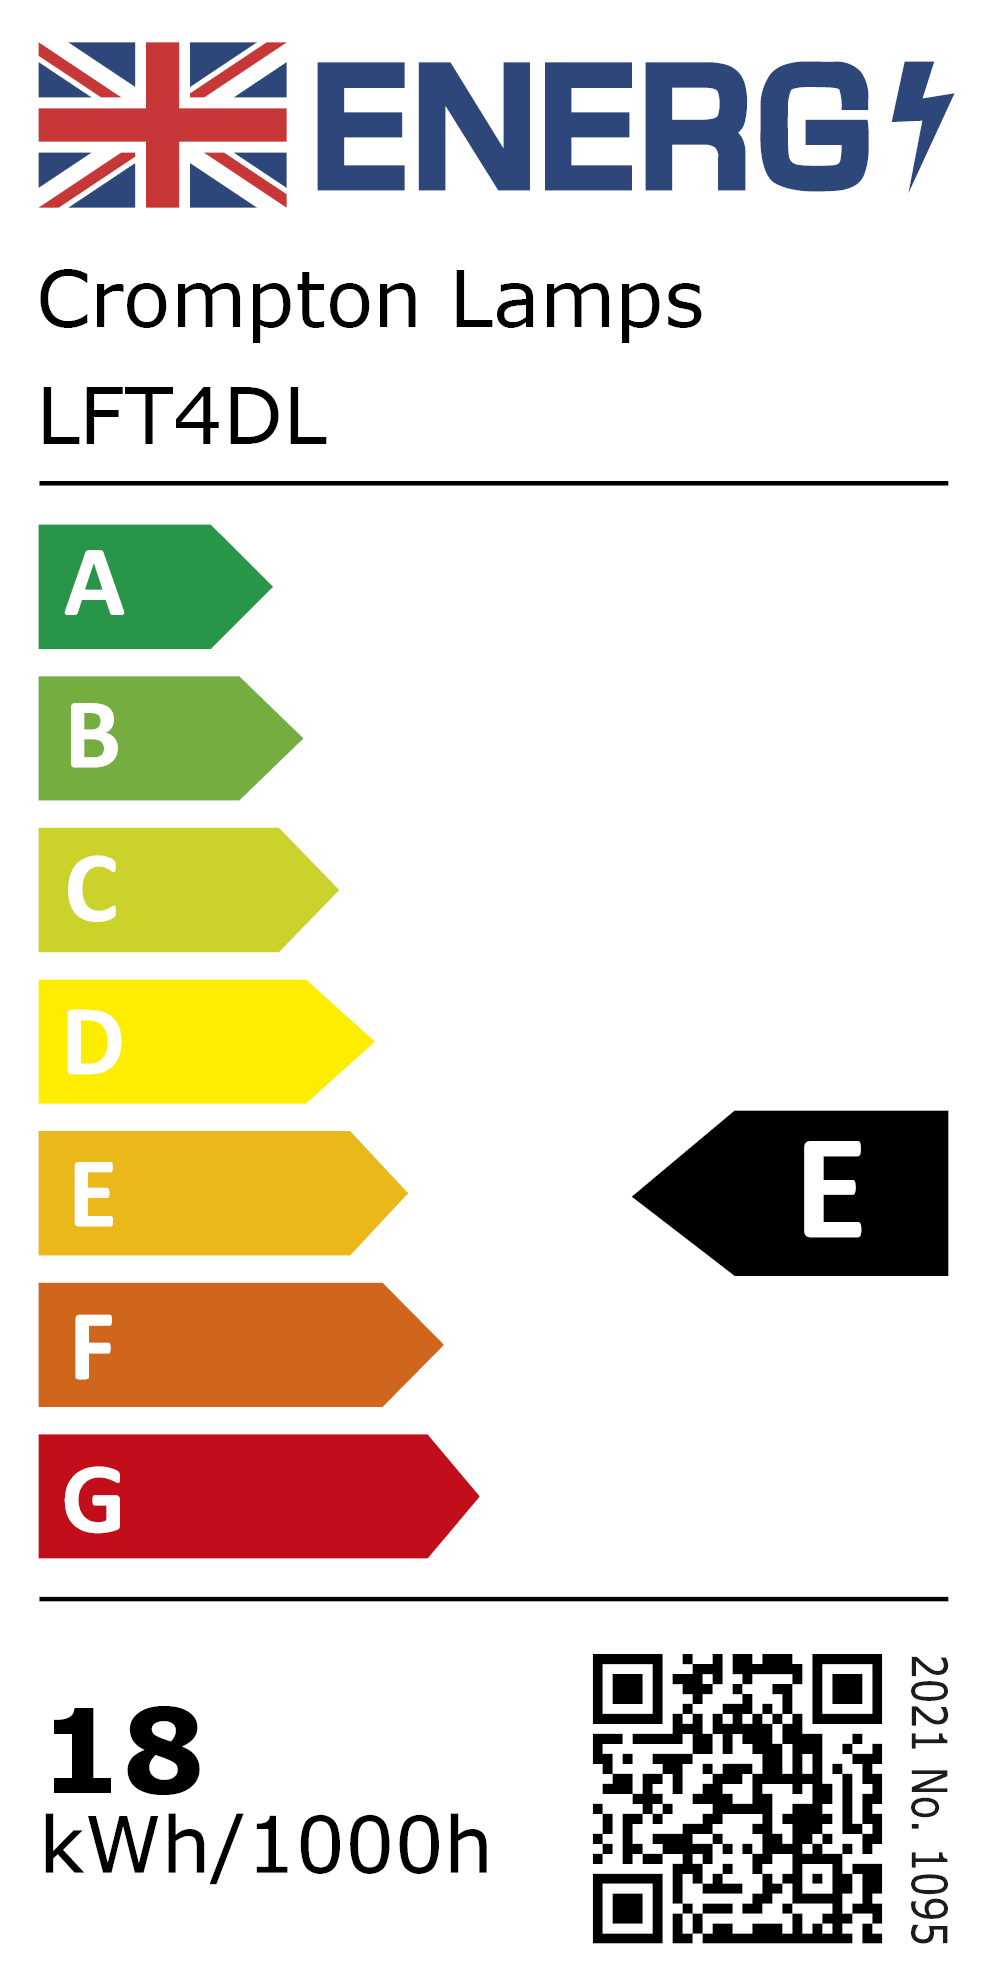 New 2021 Energy Rating Label: Stock Code LFT4DL